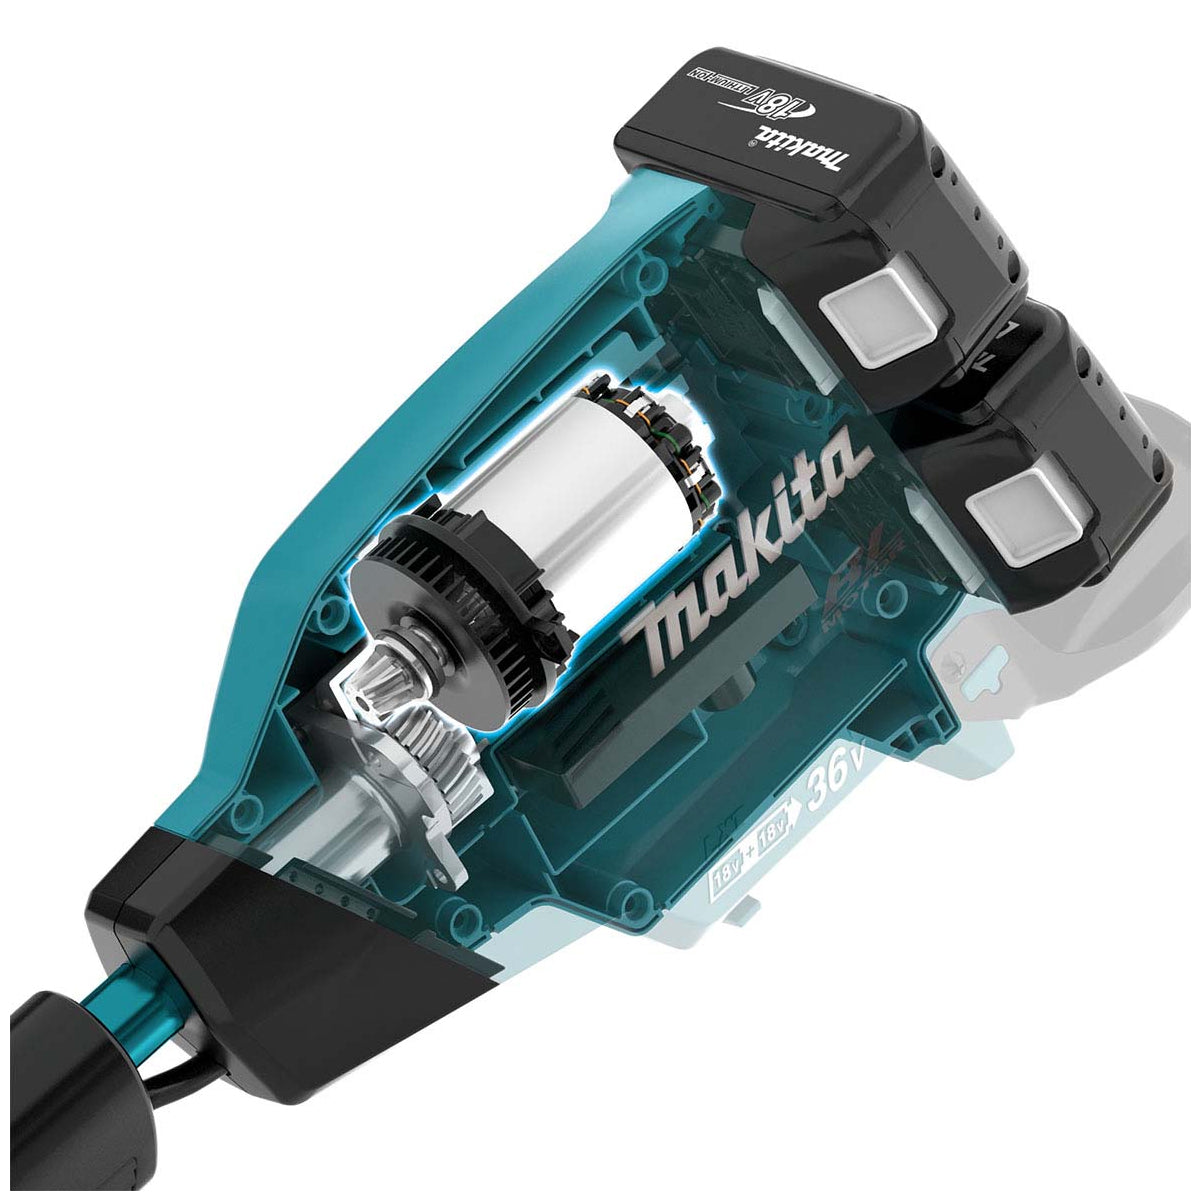 Makita DUR369APT2 36V Brushless Brush Cutter with 2 x 5.0Ah Batteries & Charger